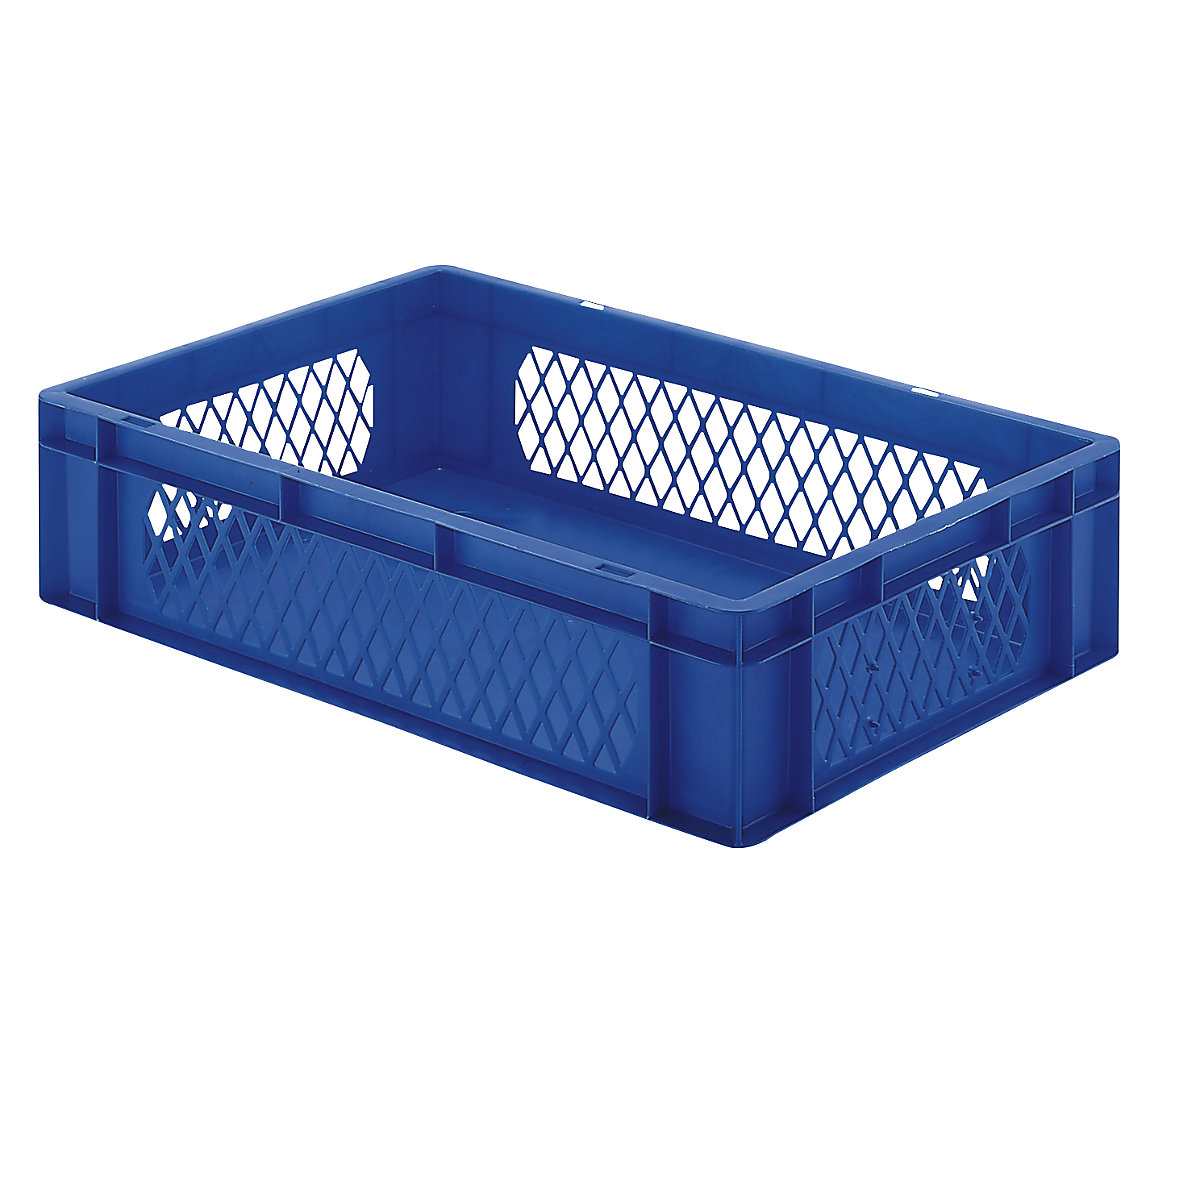 Euro stacking container, perforated walls, closed base, LxWxH 600 x 400 x 145 mm, blue, pack of 5